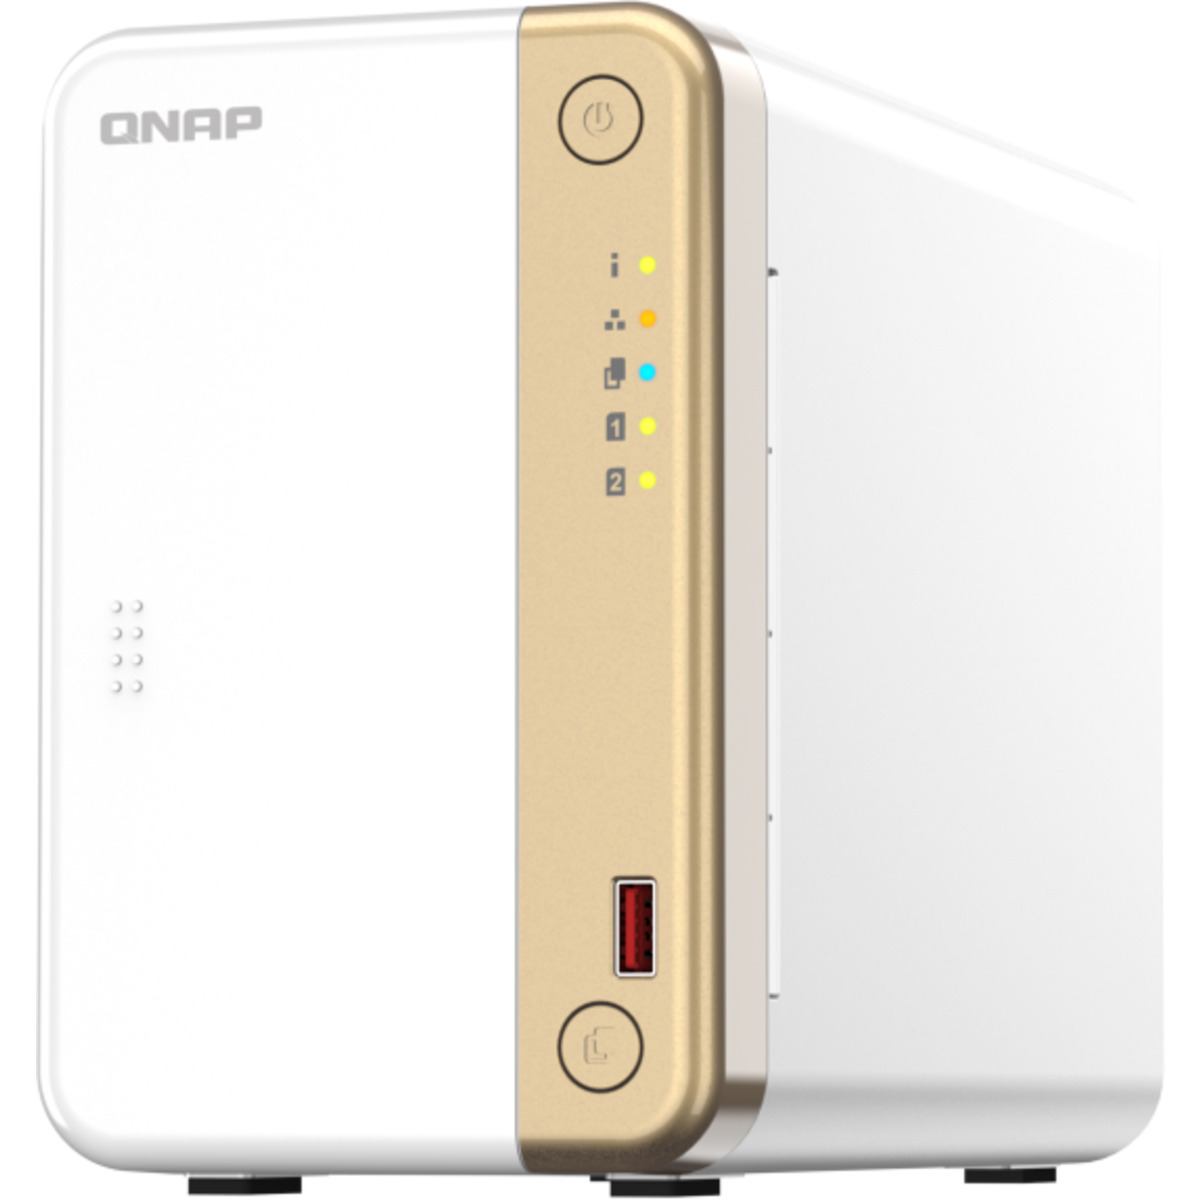 QNAP TS-262 20tb 2-Bay Desktop Personal / Basic Home / Small Office NAS - Network Attached Storage Device 1x20tb Western Digital Ultrastar HC560 WUH722020ALE6L4 3.5 7200rpm SATA 6Gb/s HDD ENTERPRISE Class Drives Installed - Burn-In Tested TS-262